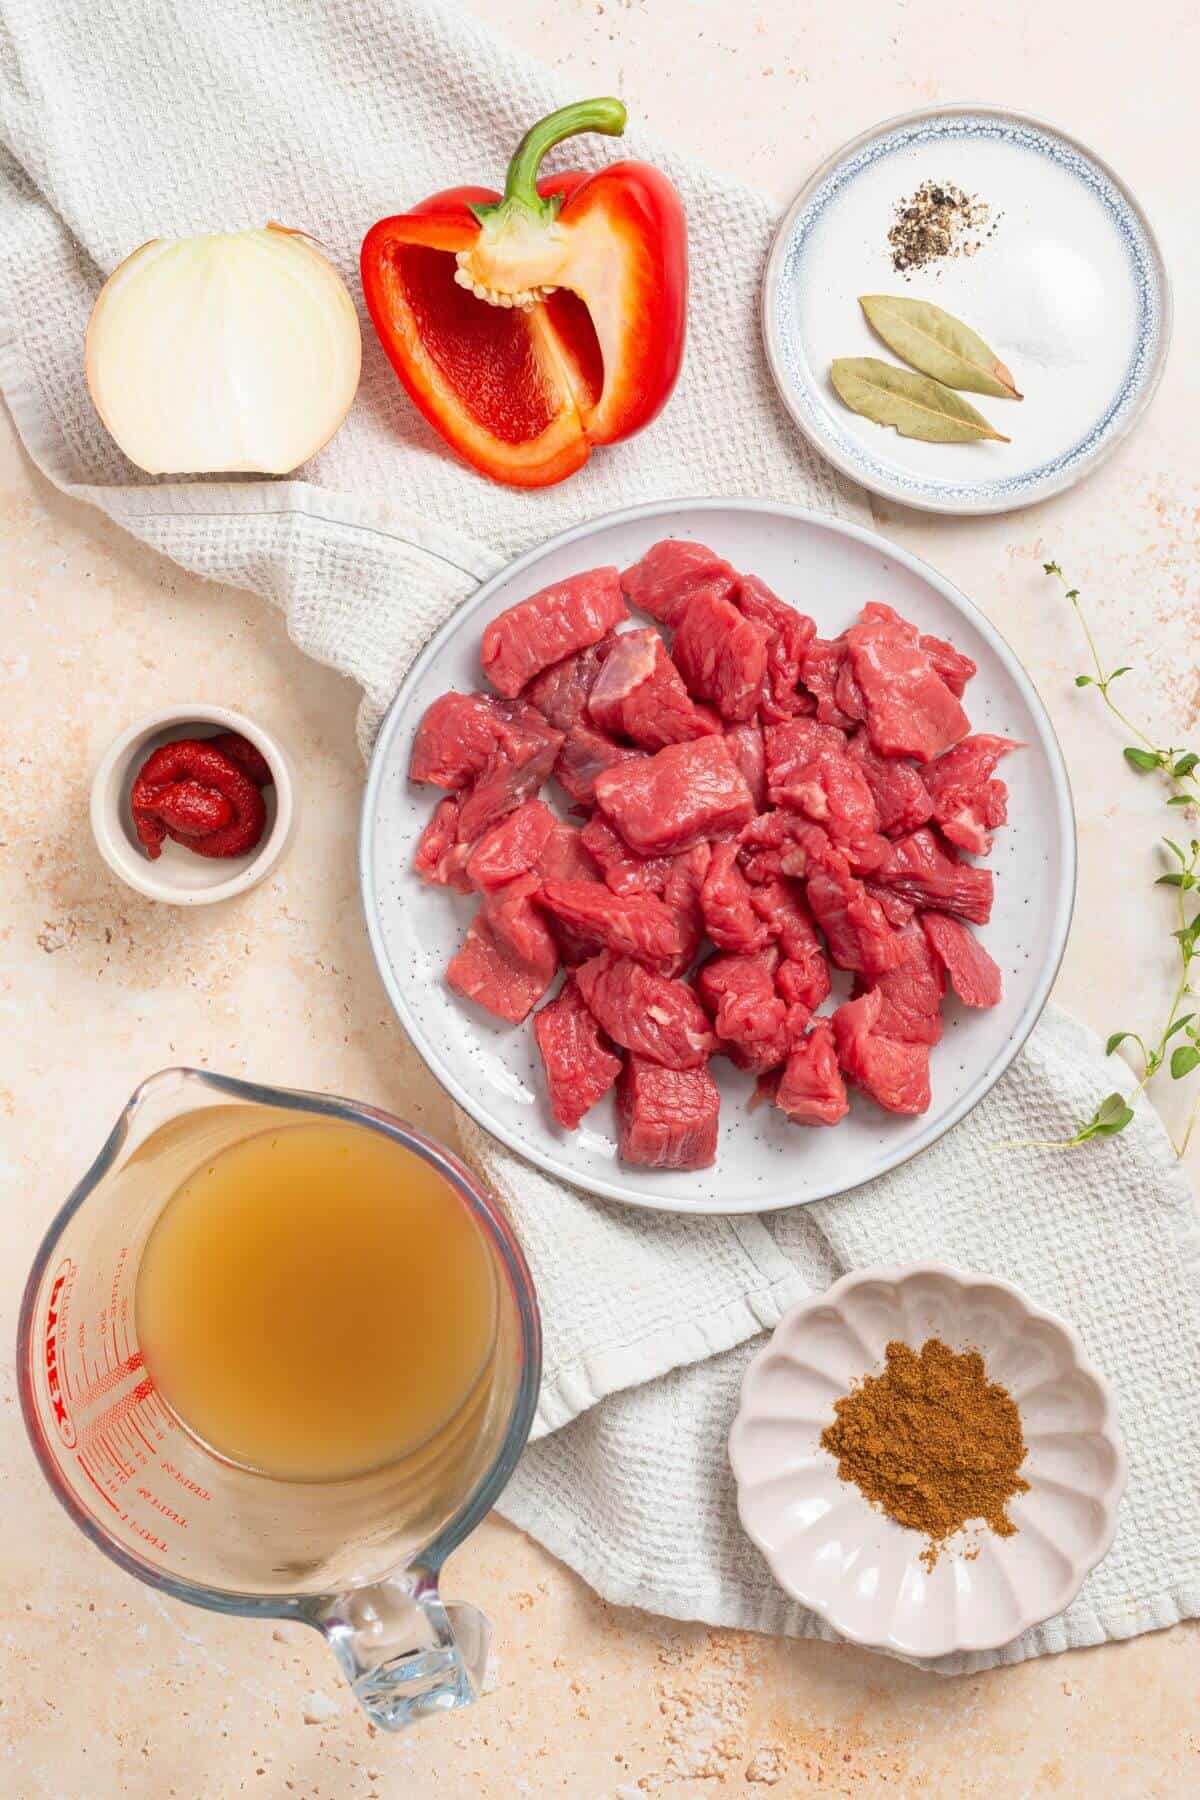 The ingredients for a pepper steak dish are on a table.